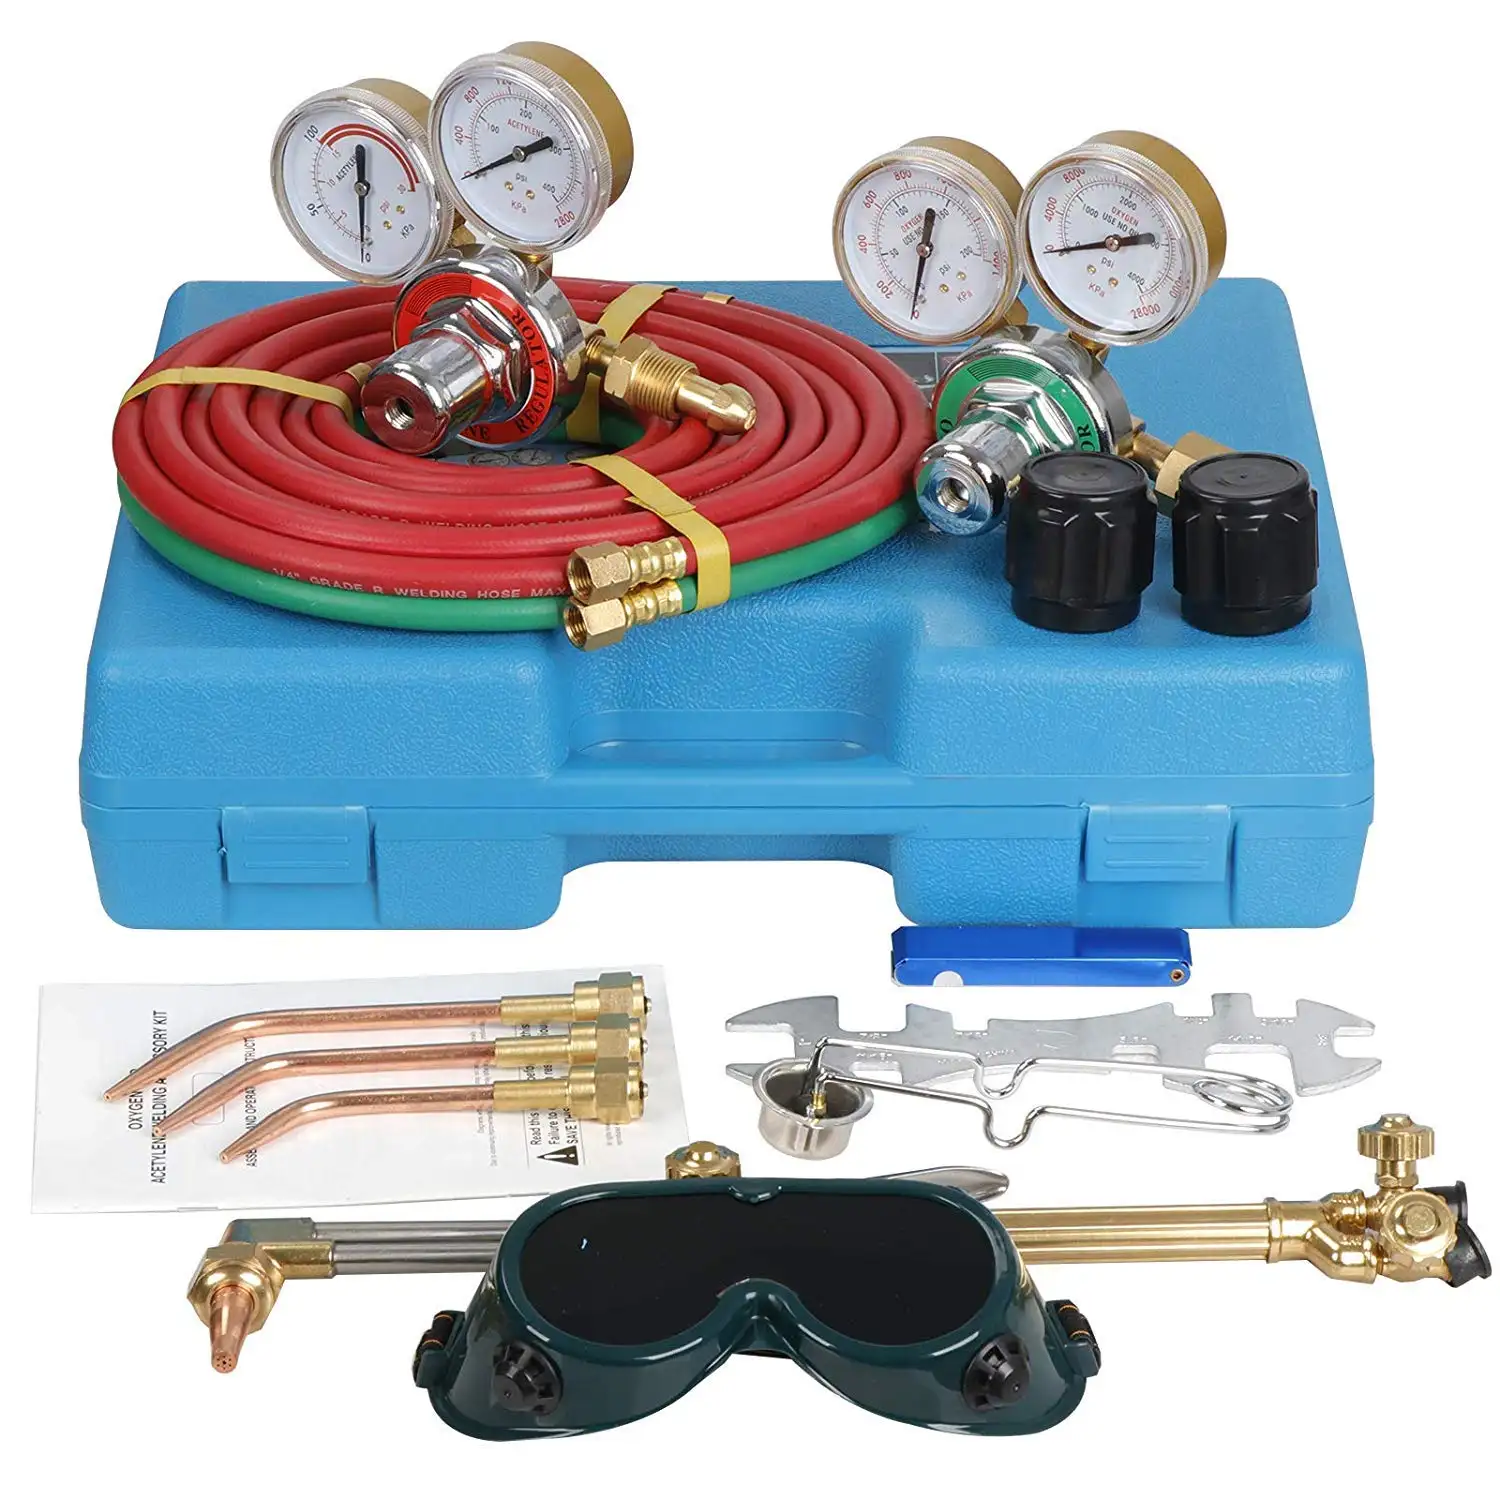 Mini Gas Welding Cutting Oxy Oxygen Acetylene Torch Kit Welder Tool 2M Cables 